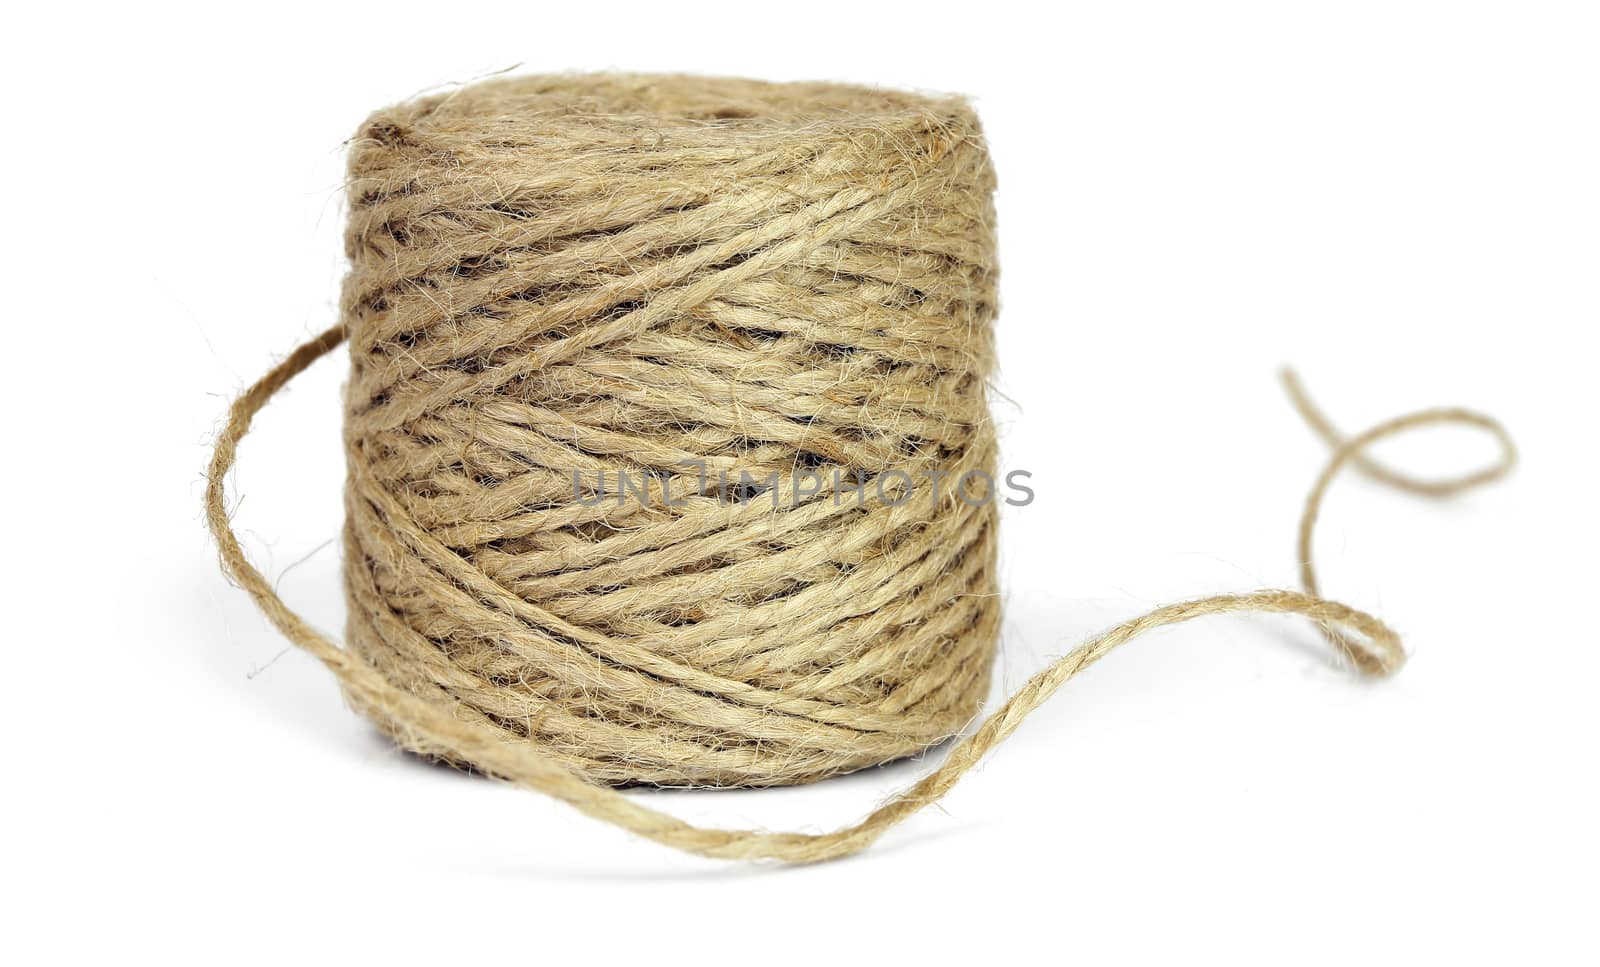 Skein of jute rope for packing, isolated on a white background.